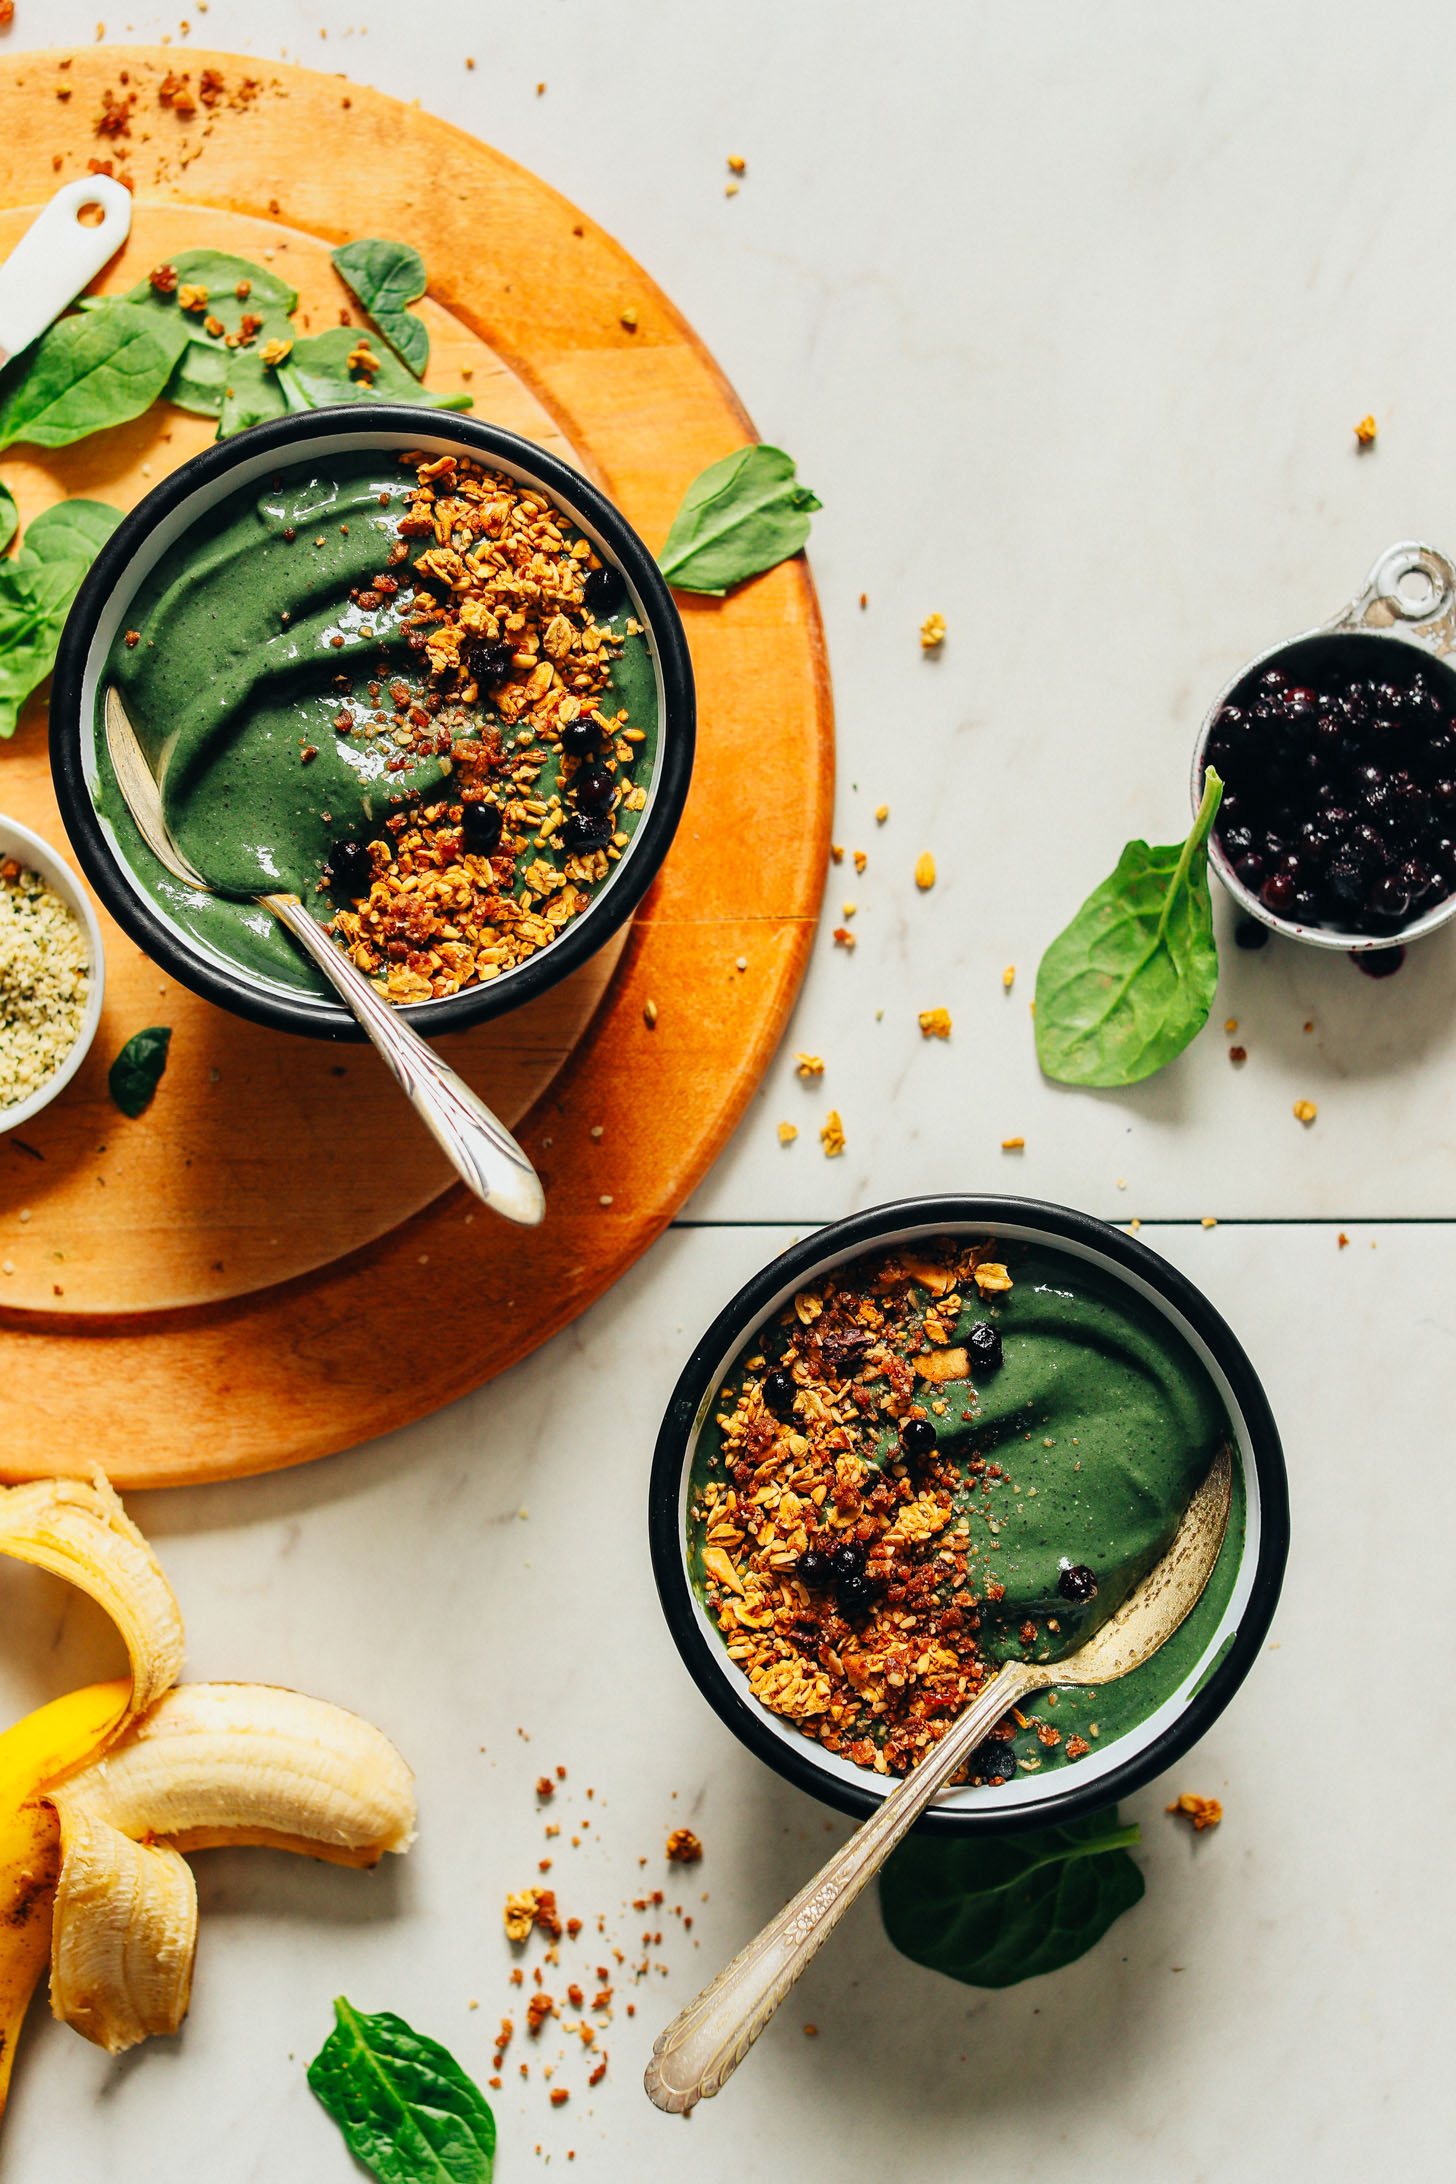 Bowls of our Peanut Butter Banana Super Green Smoothie topped with granola